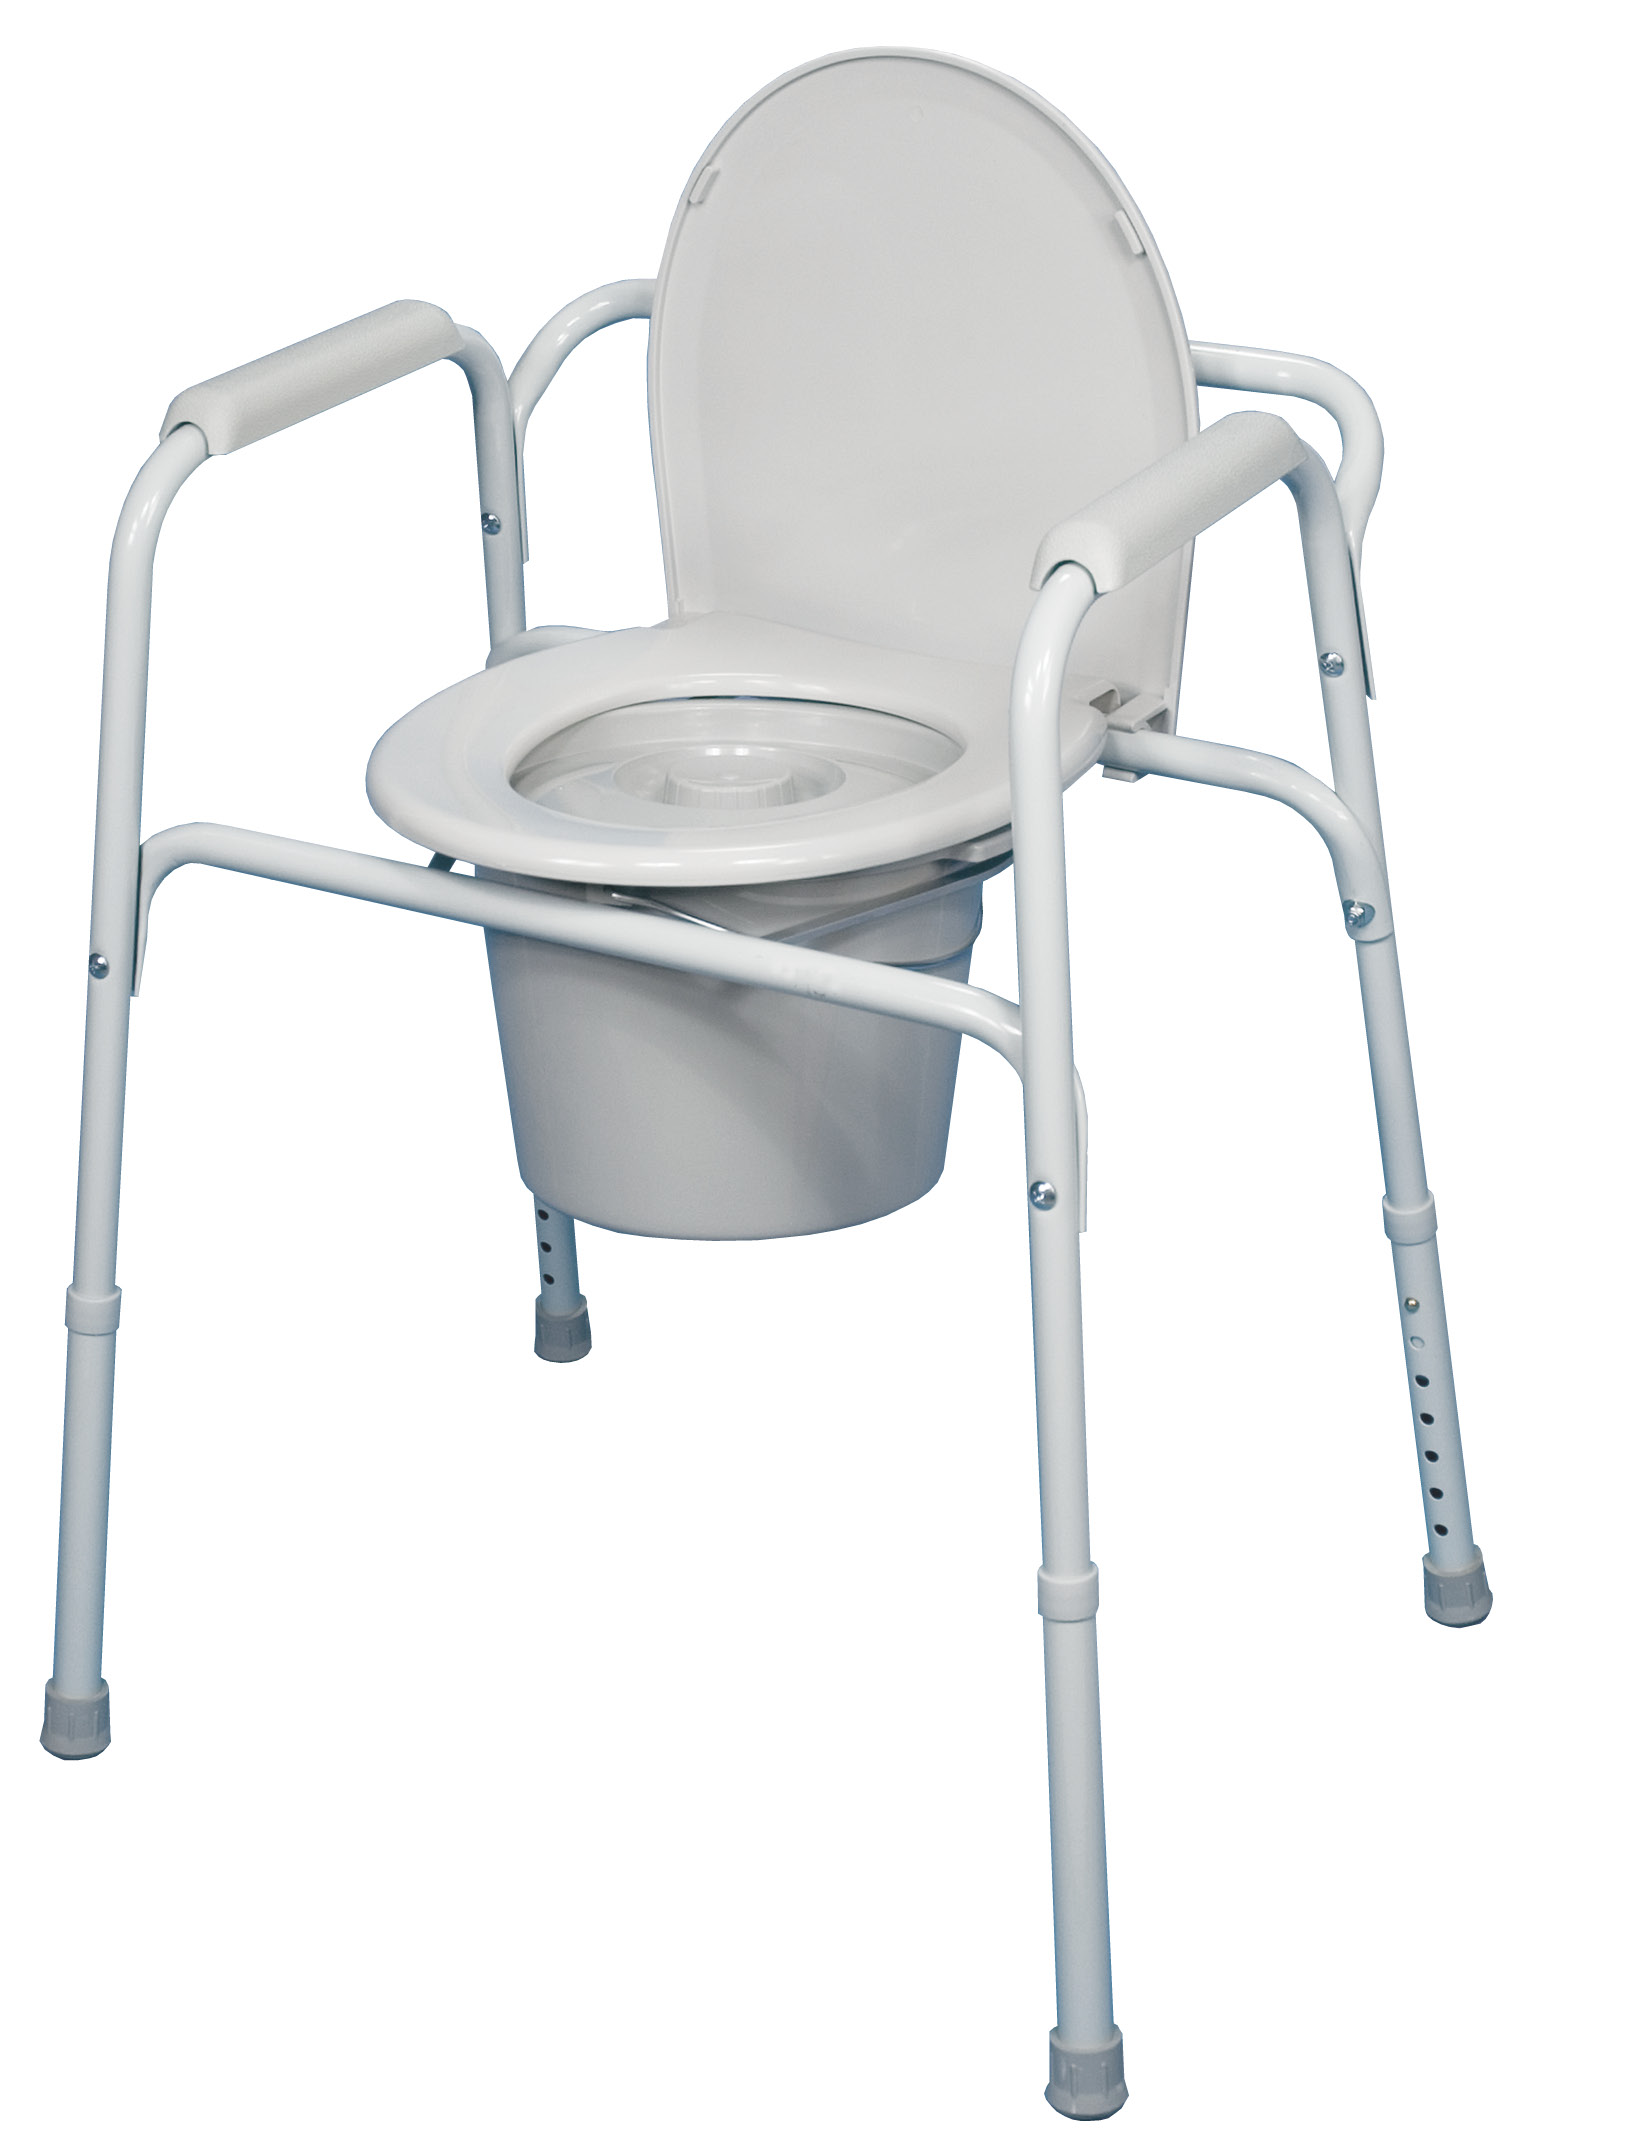 3-in-1 Commode - image 1 of 1